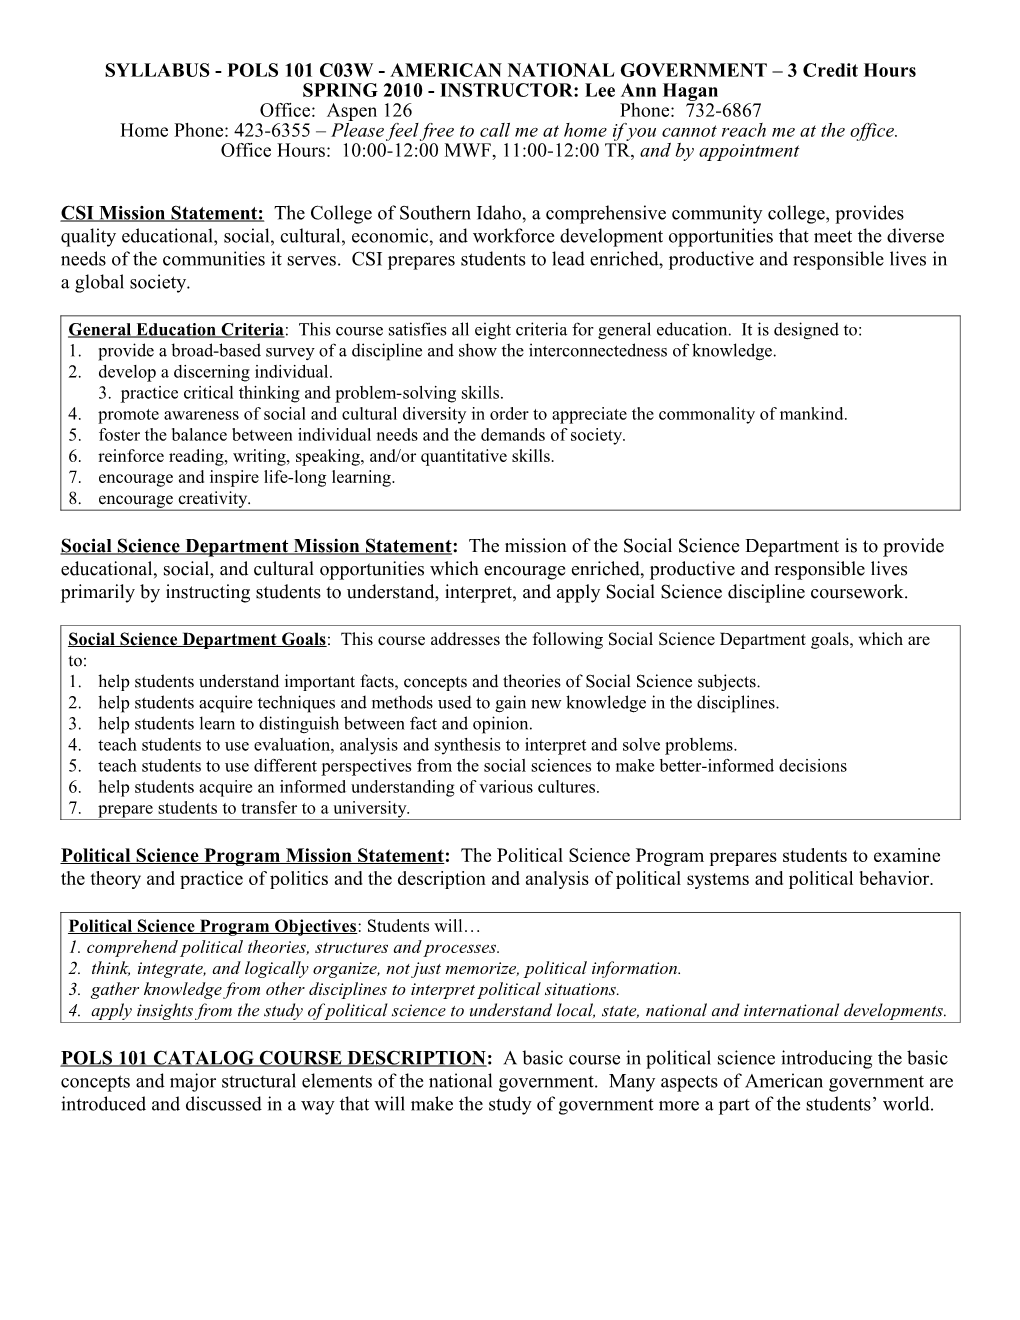 SYLLABUS - POLS 101 C03W - AMERICAN NATIONAL GOVERNMENT 3 Credit Hours